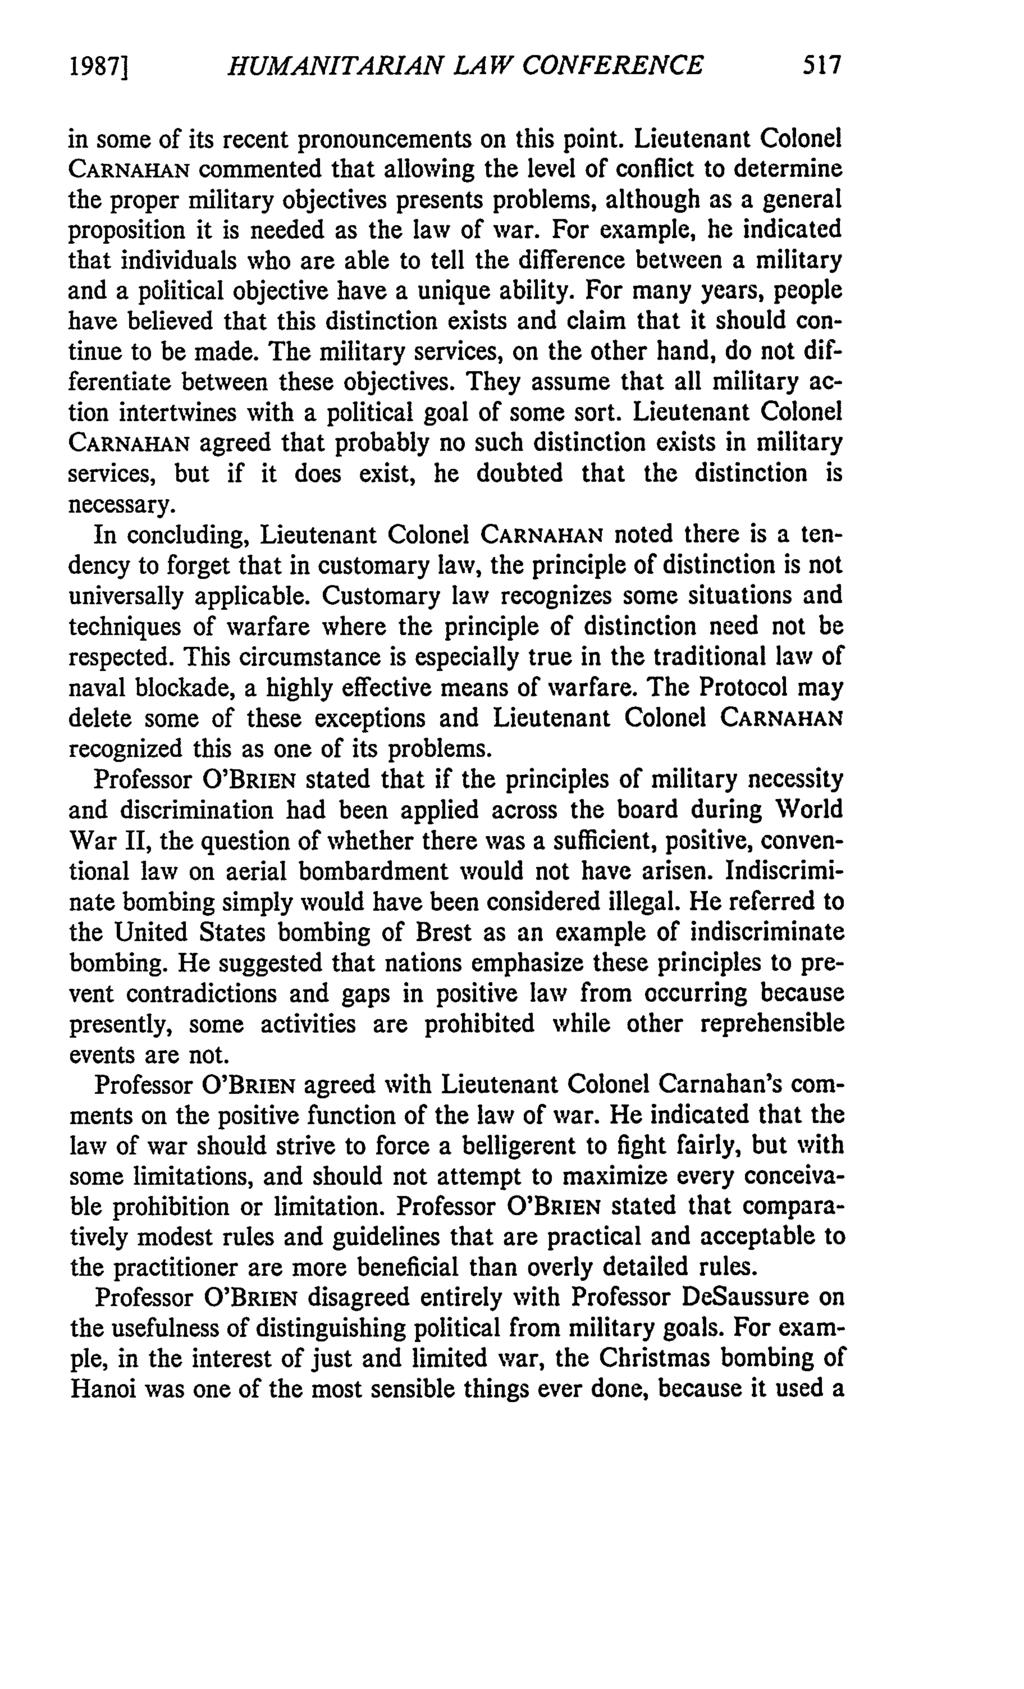 1987] HUMANITARIAN LAW CONFERENCE in some of its recent pronouncements on this point.